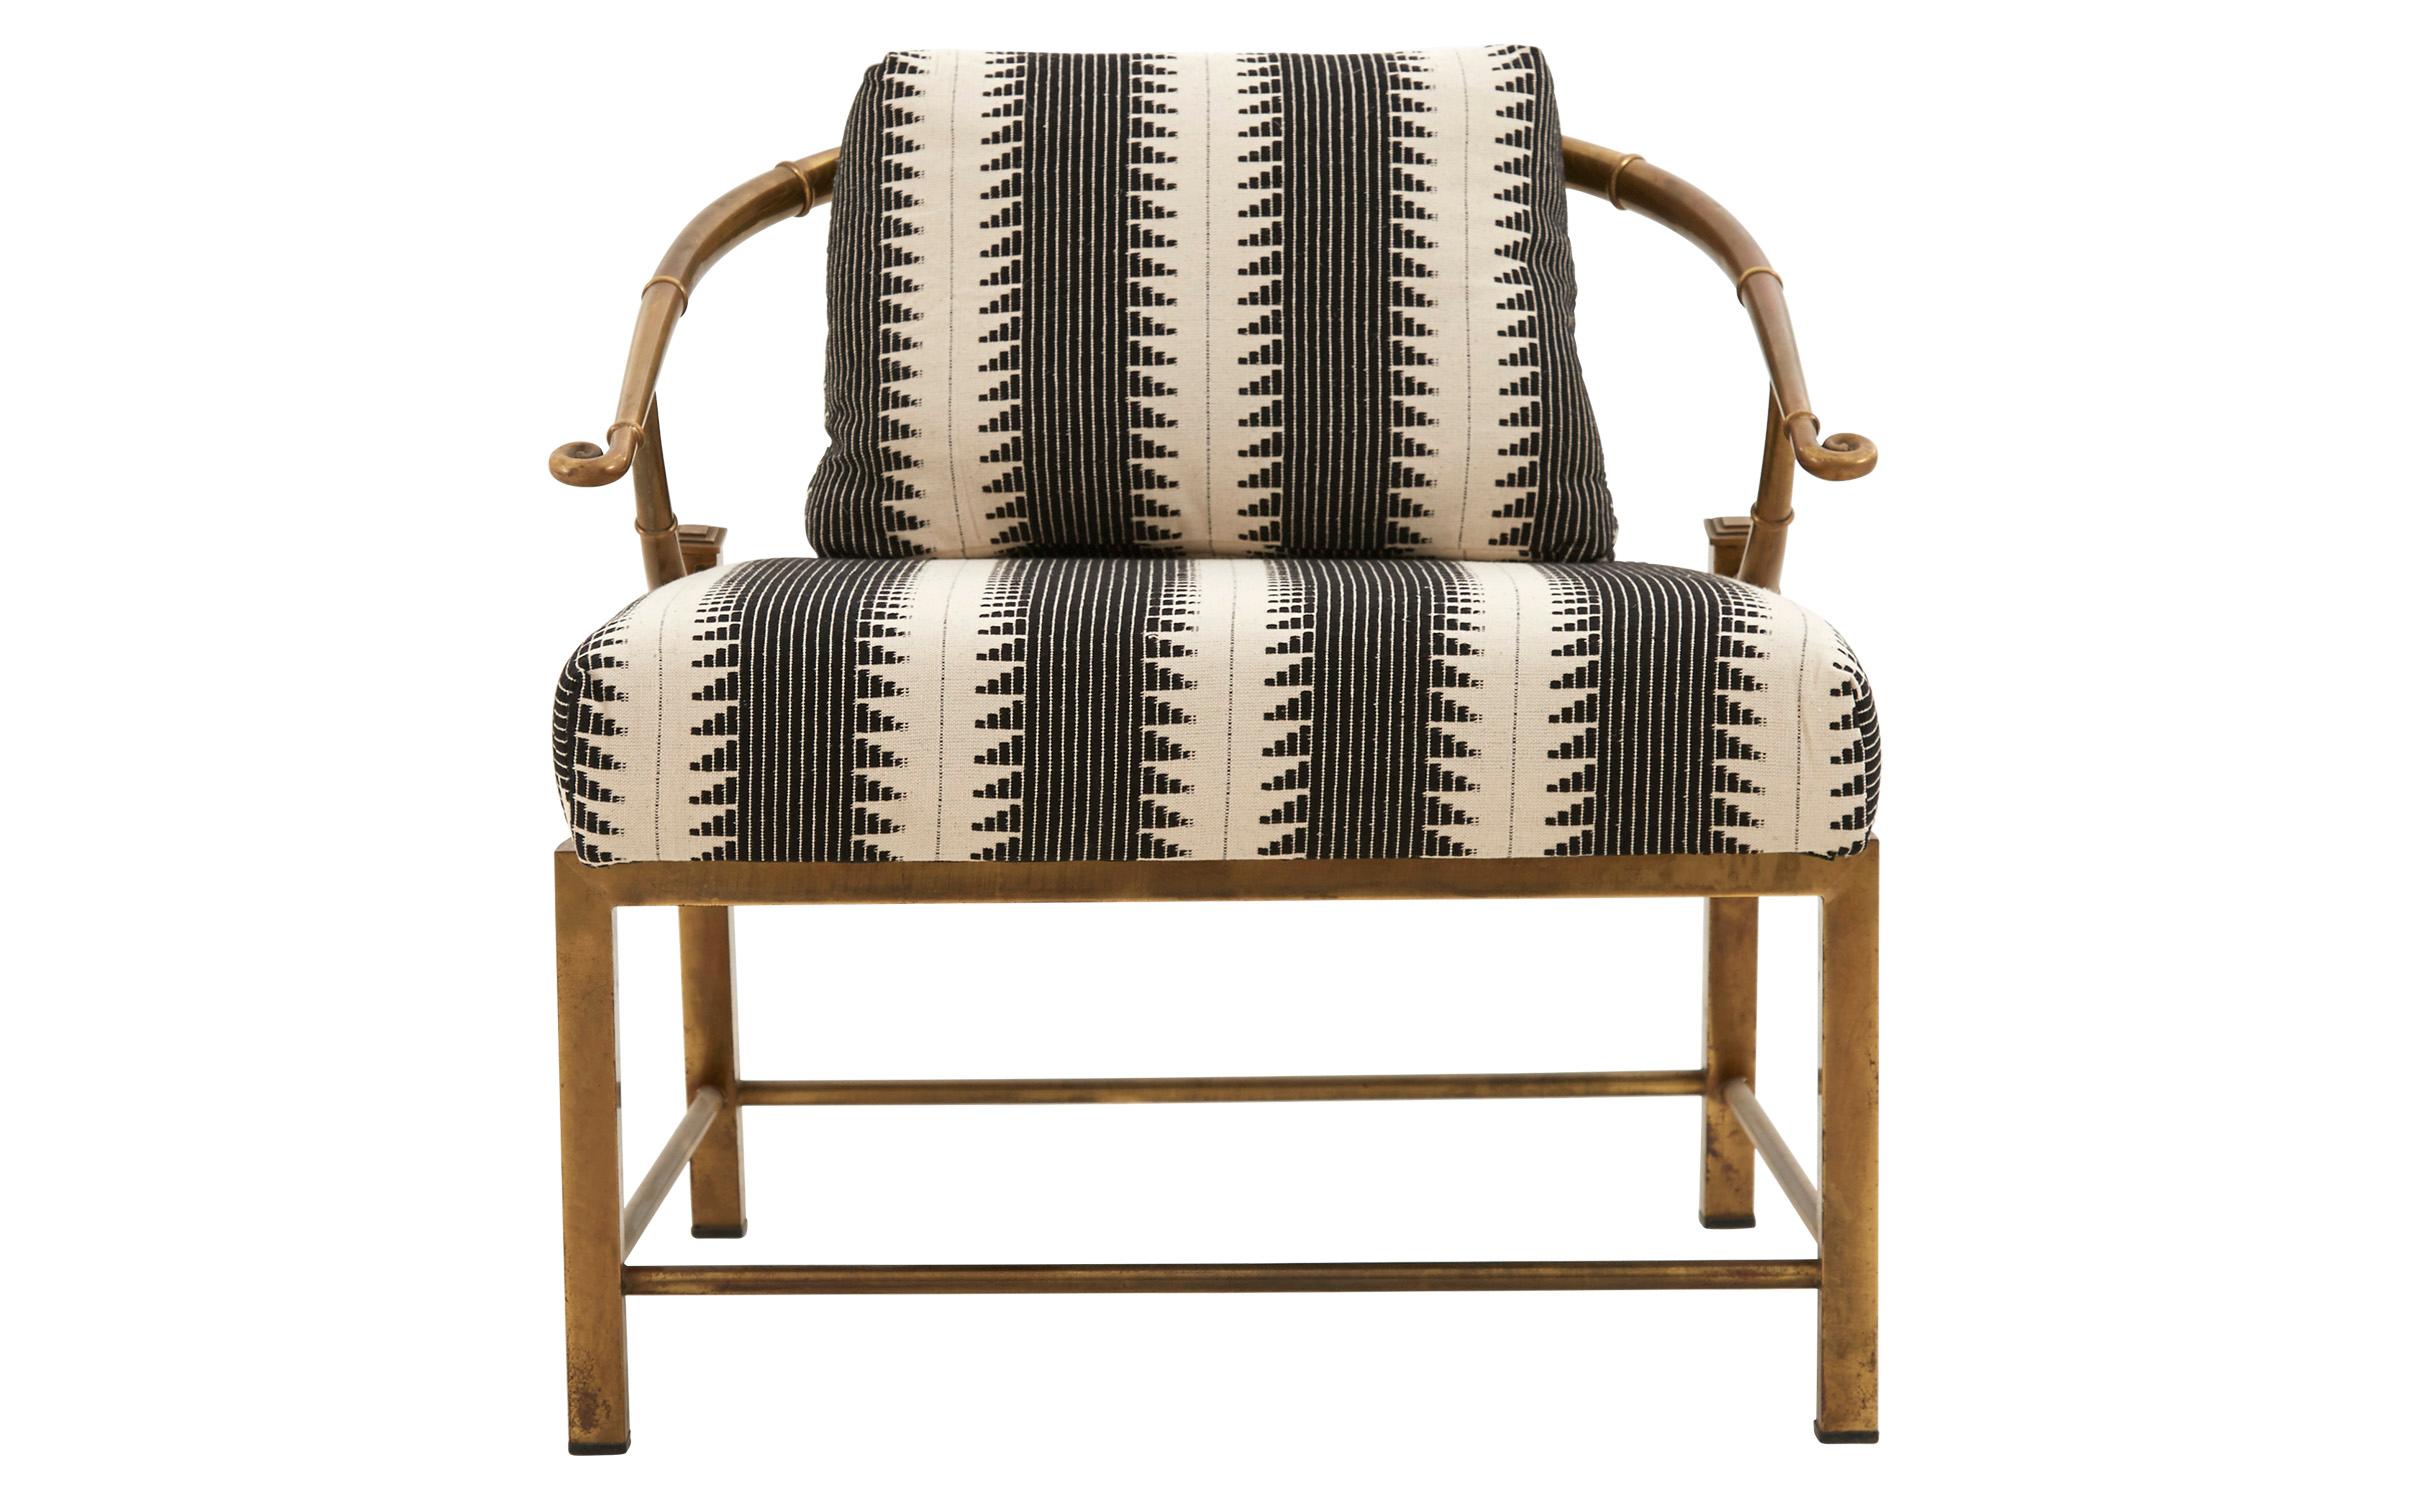 • Reupholstered in black and cream graphic print
• Patinaed brass faux bamboo frame
• Designed by Charles Pengally
• Produced by Mastercraft
• circa 1970
• American

Dimensions:
• 28